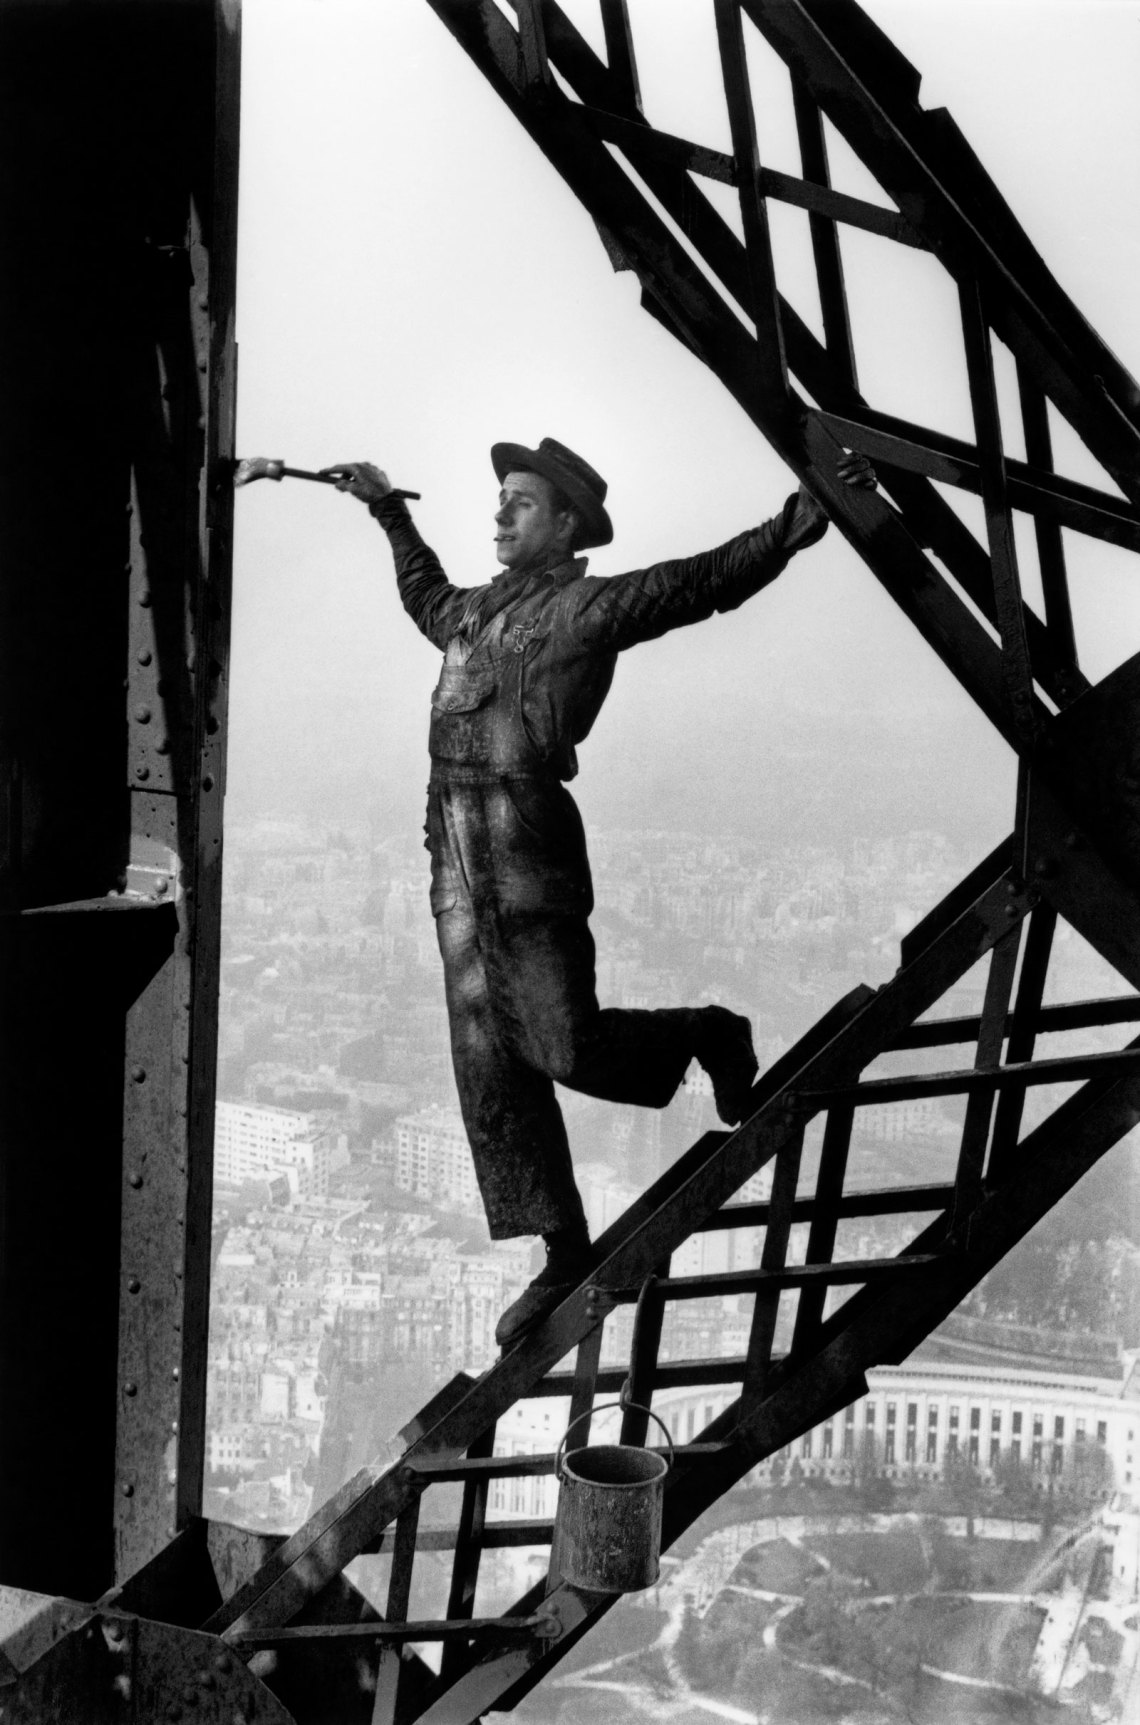 black and white image of a painter with one leg up balletically, his brush poised to bank the iron beam of the Eiffel Tower